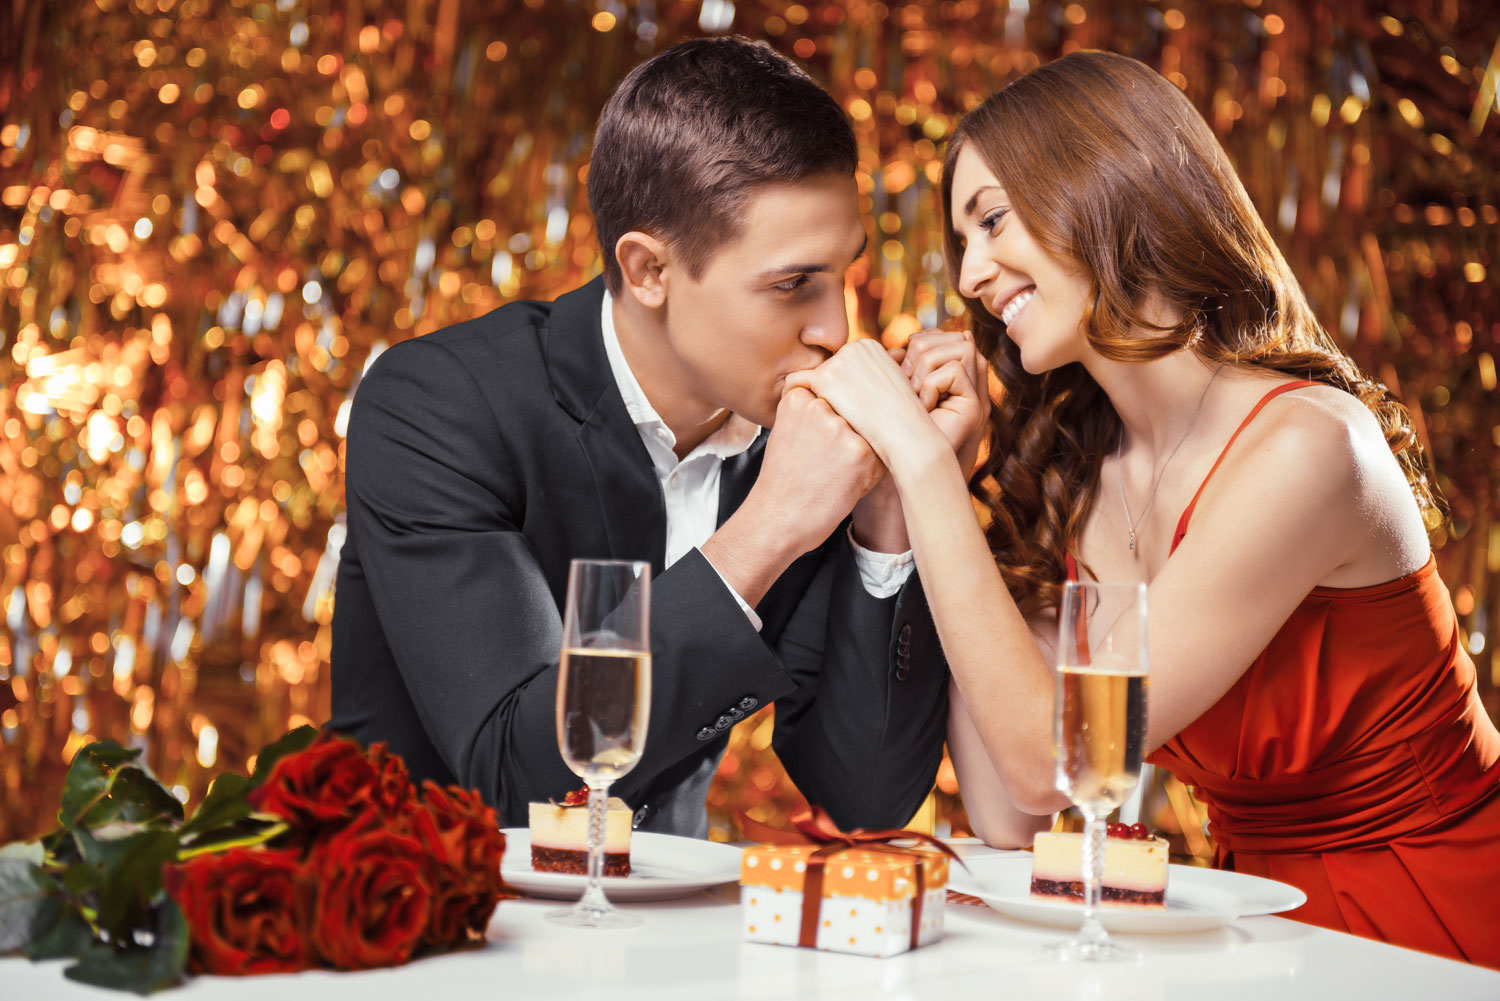 50 Best Valentine's Day Date Ideas For Romantic Couples